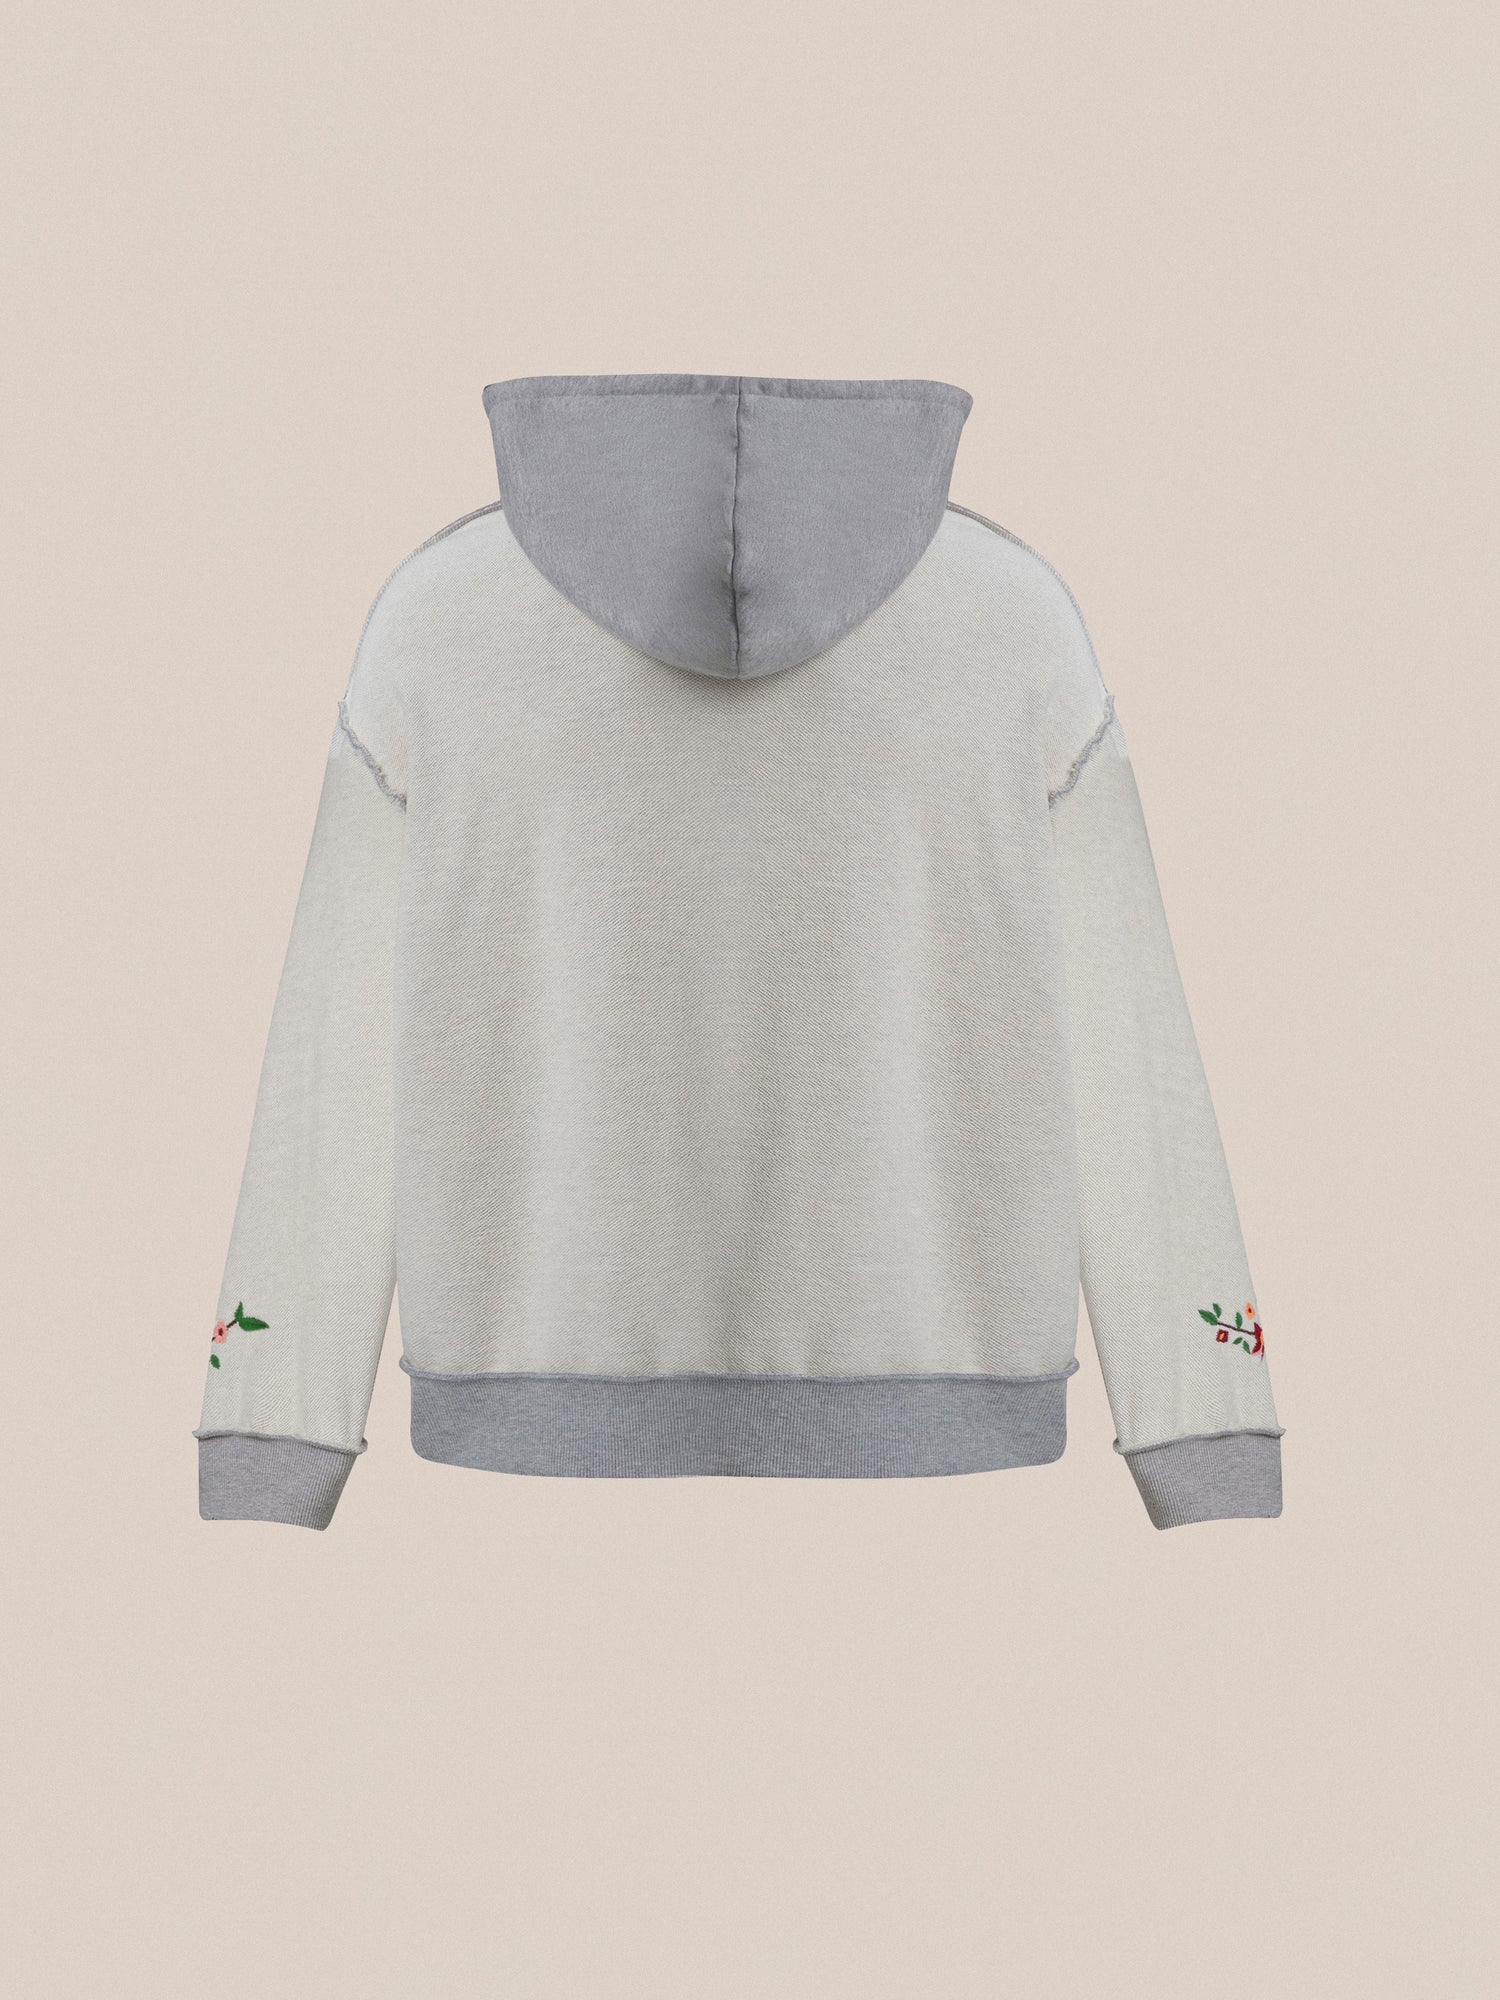 A child's Found Inverse Flower Petal Hoodie with embroidered details, crafted from French terry fabric.